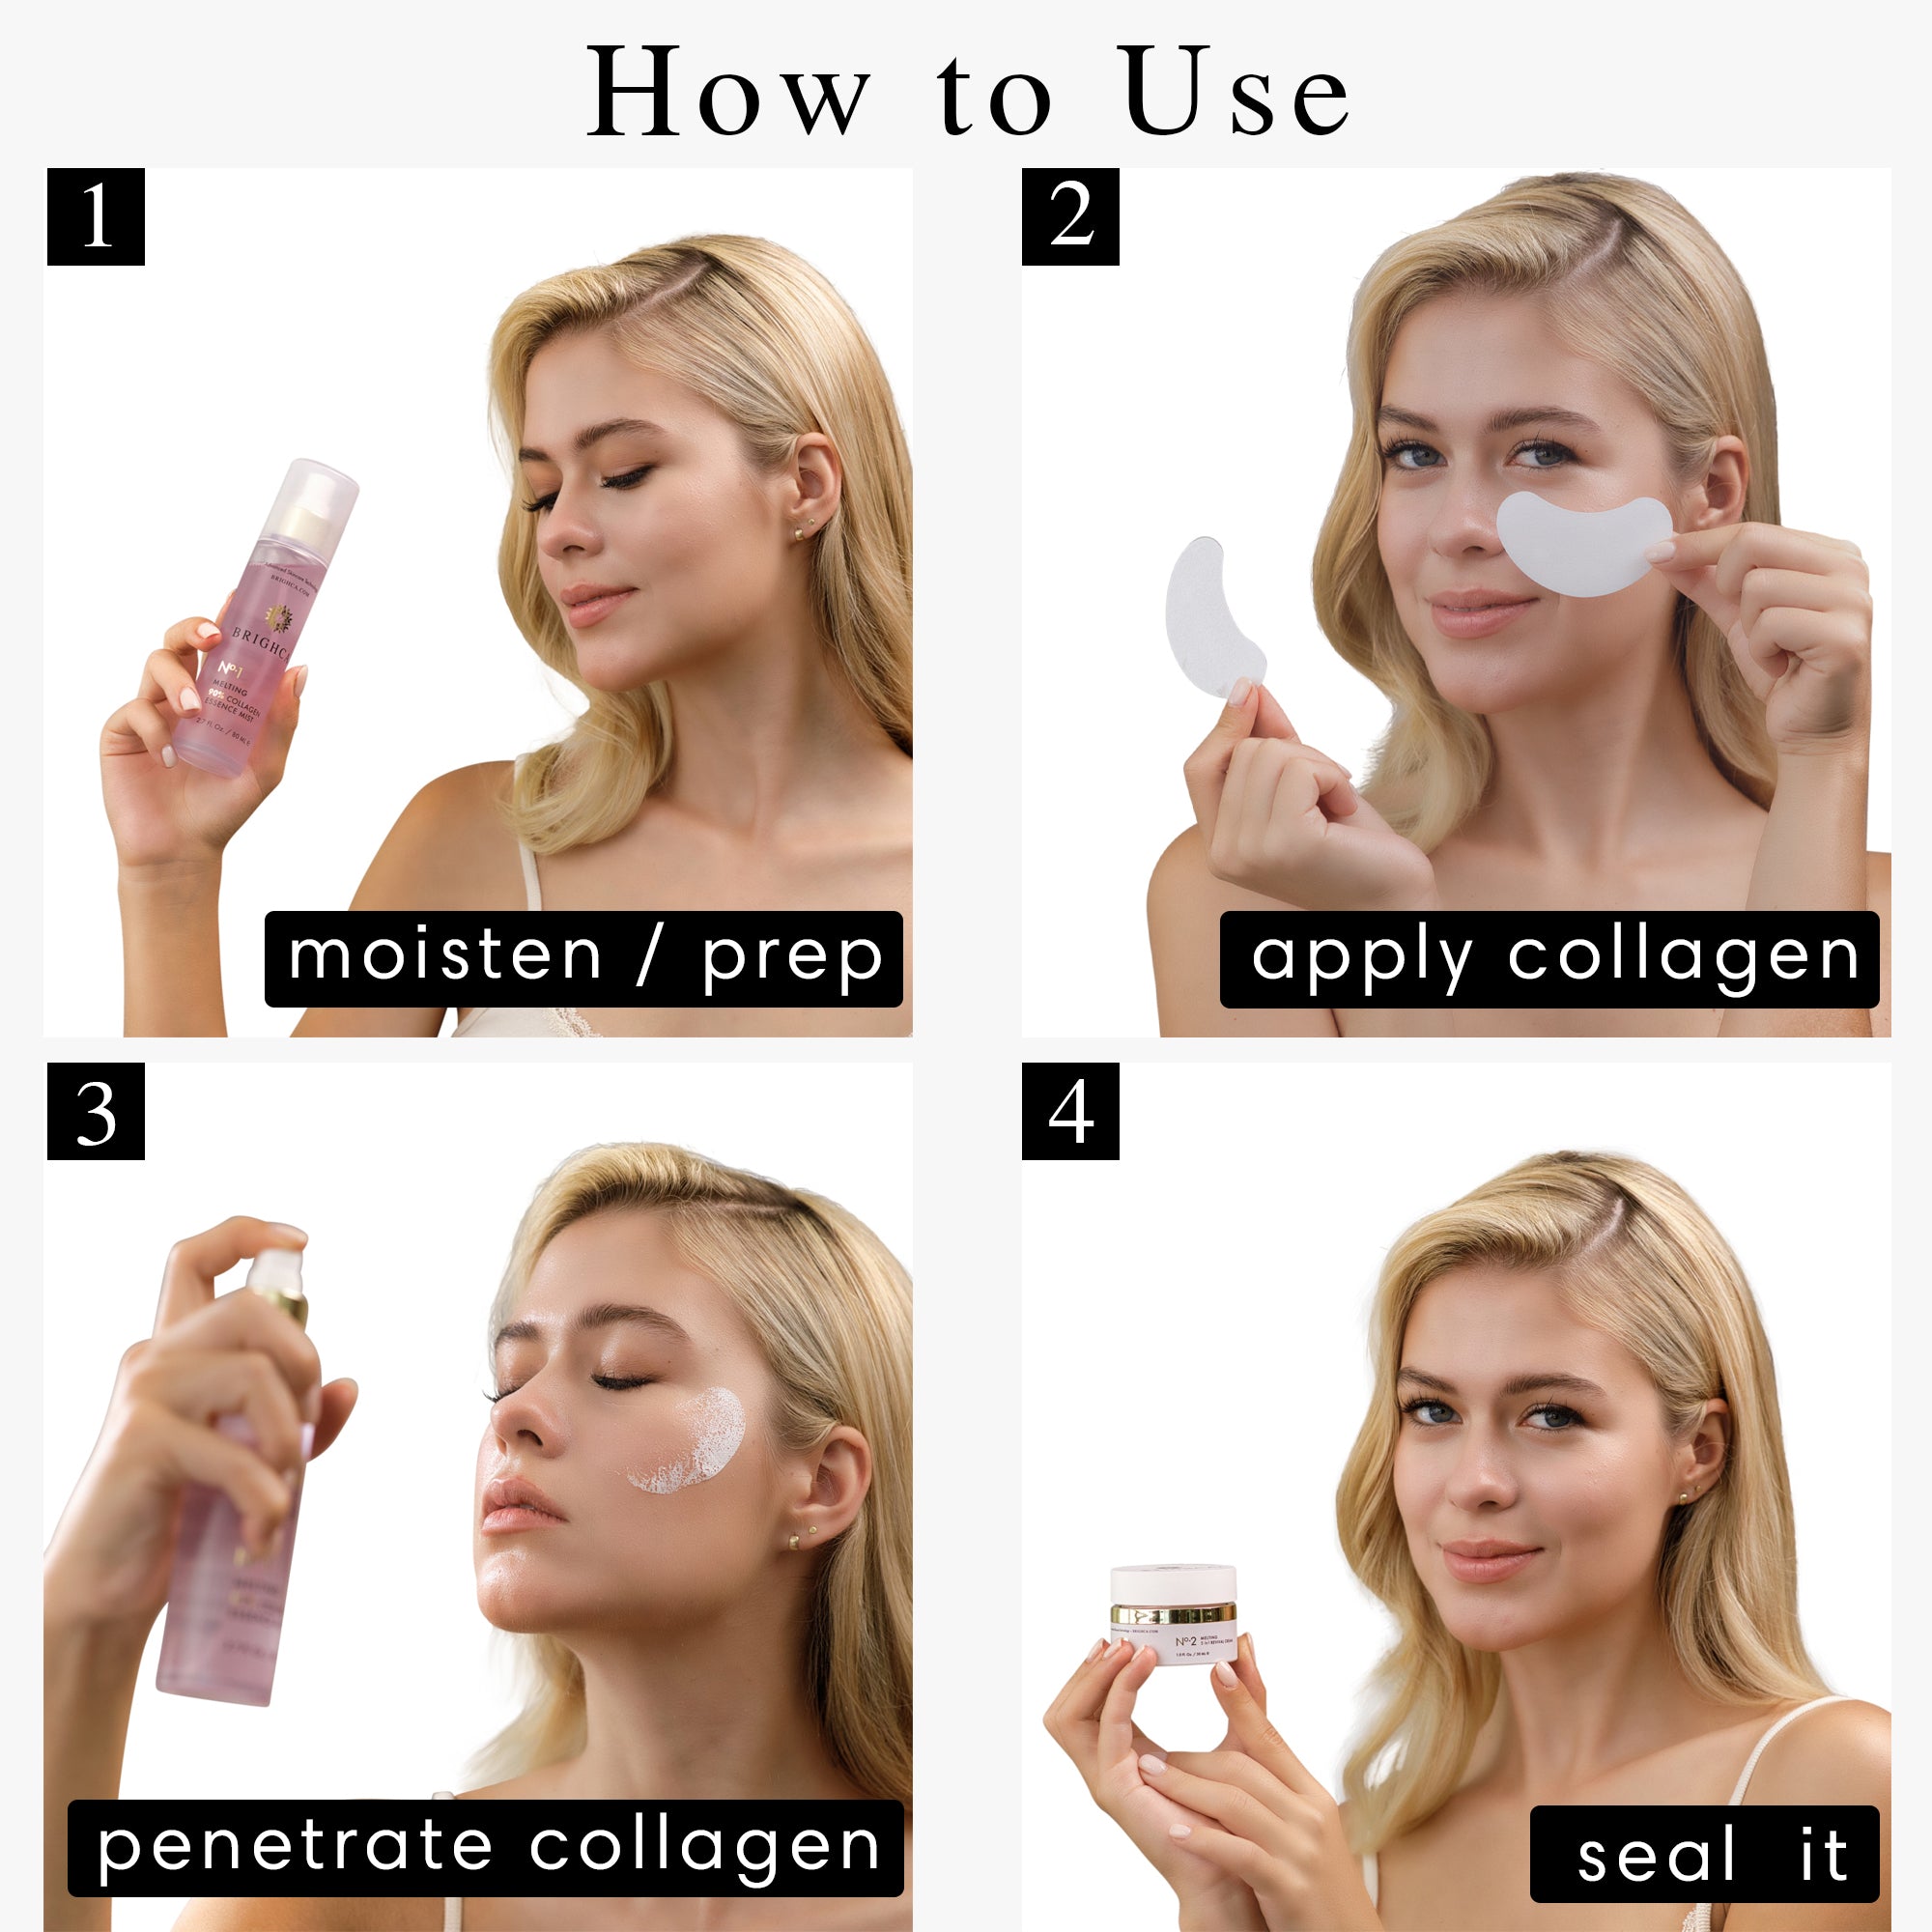 How to Use Melting Nanofiber Collagen Film Face Treatment Brighca for anti-aging, lifting, firming, hydrating, 